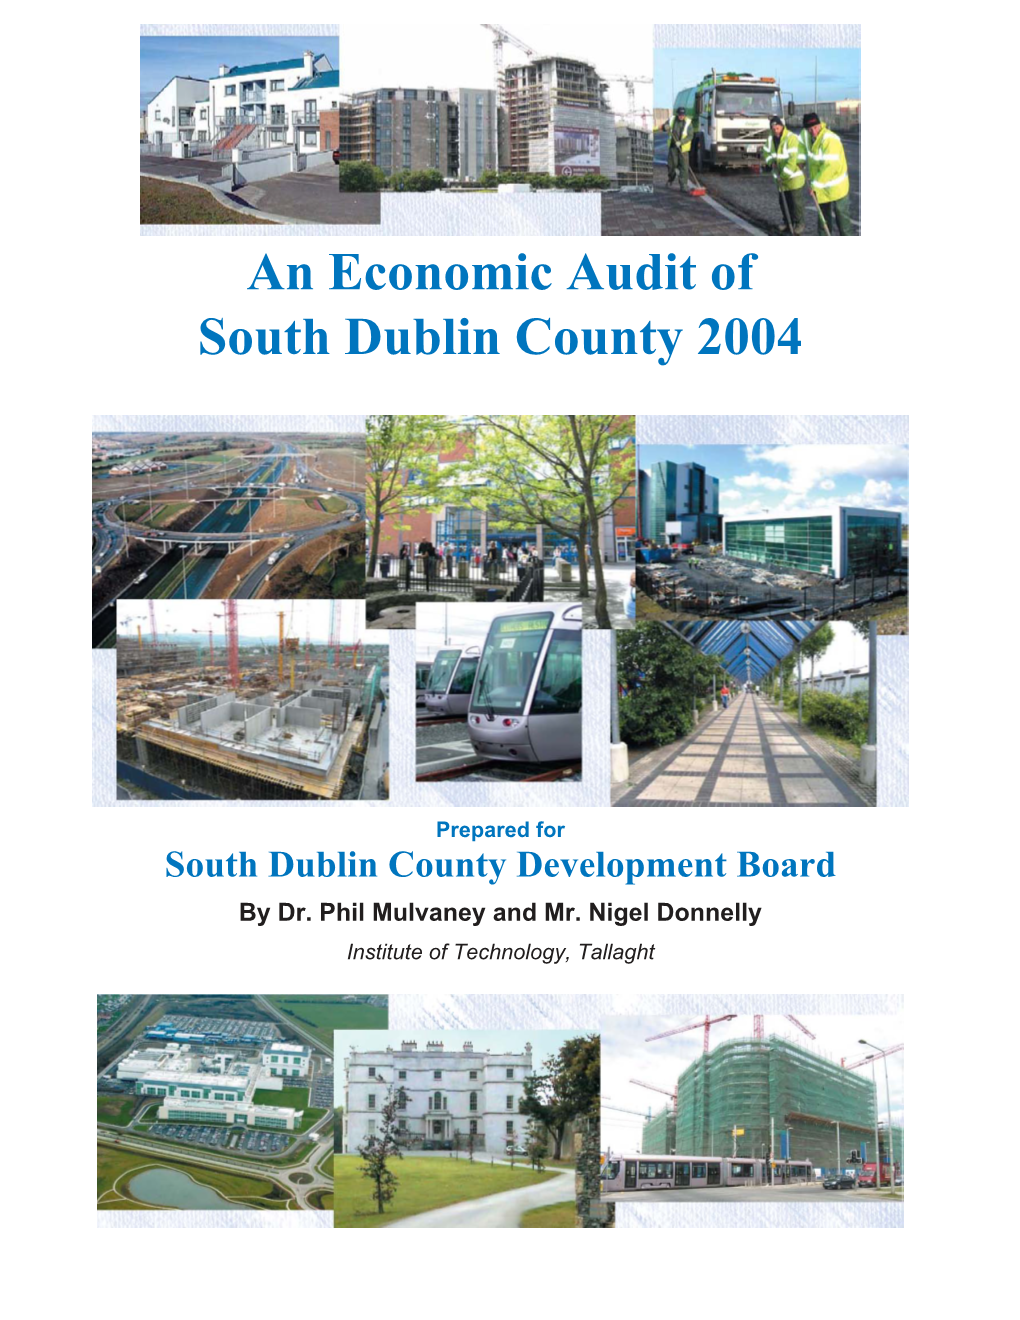 An Economic Audit of South Dublin County 2004